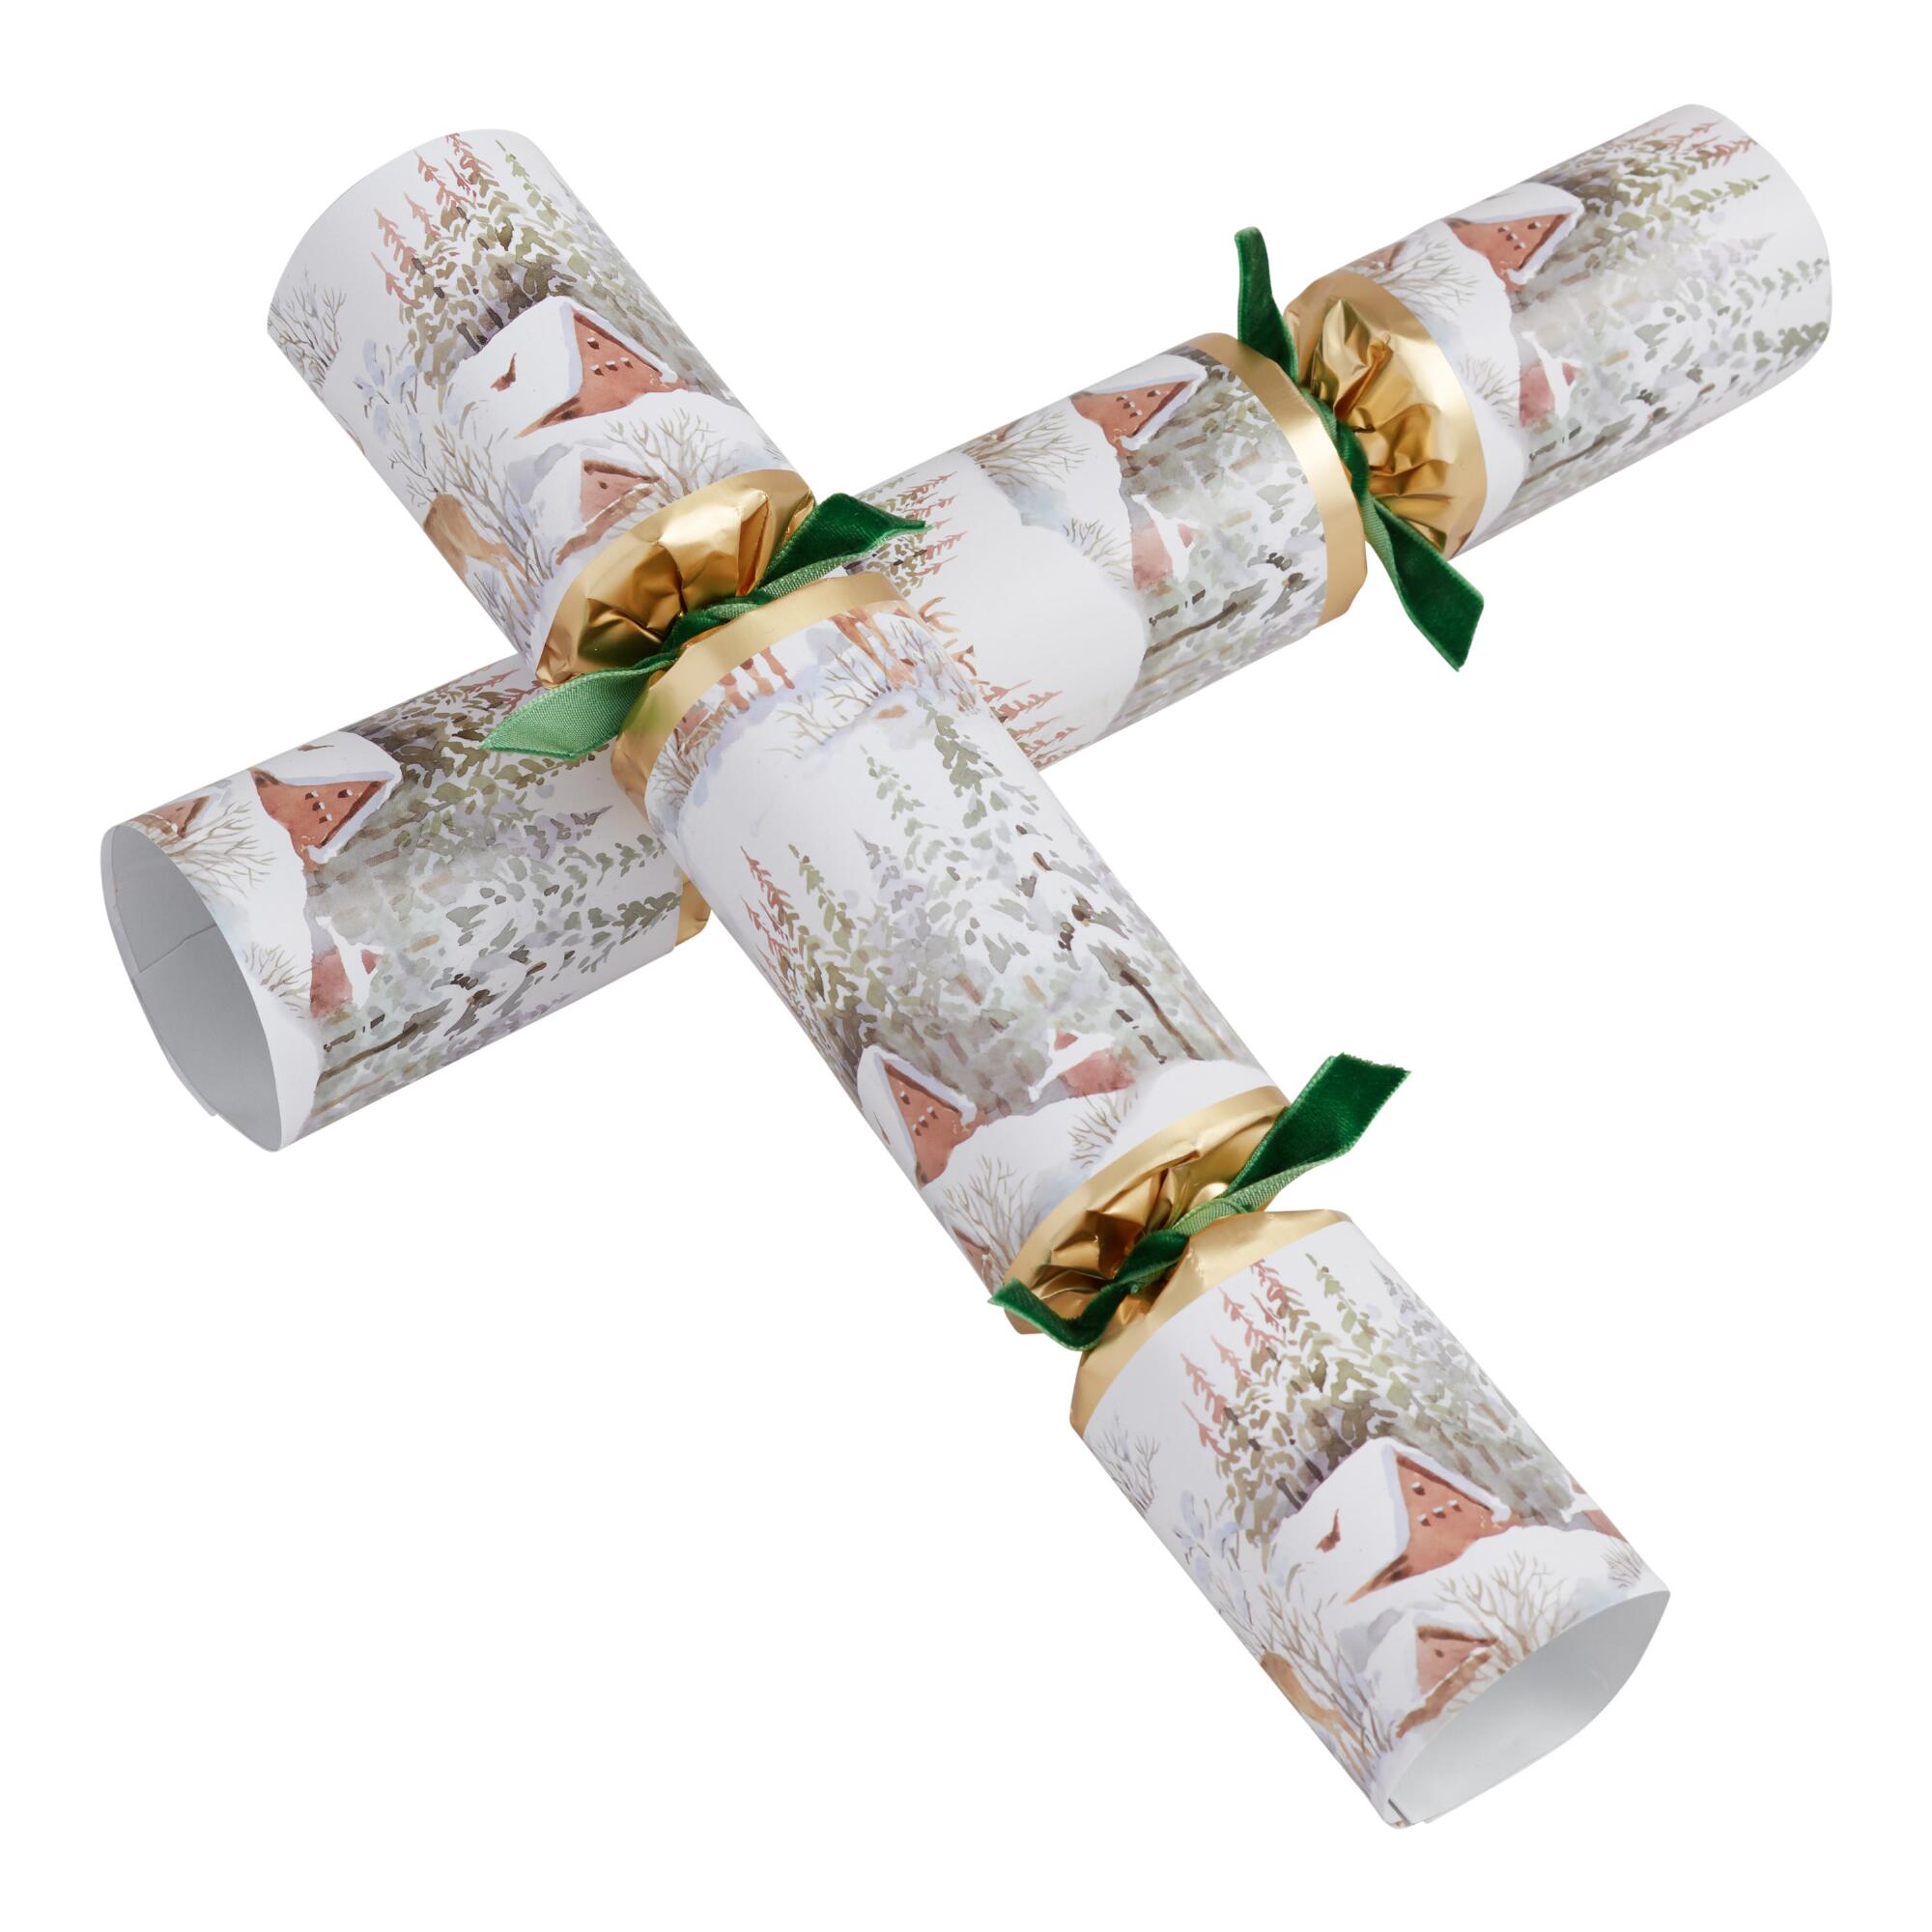 Medium Gold Stag Crackers 8 Count: Multi - Paper by World Market